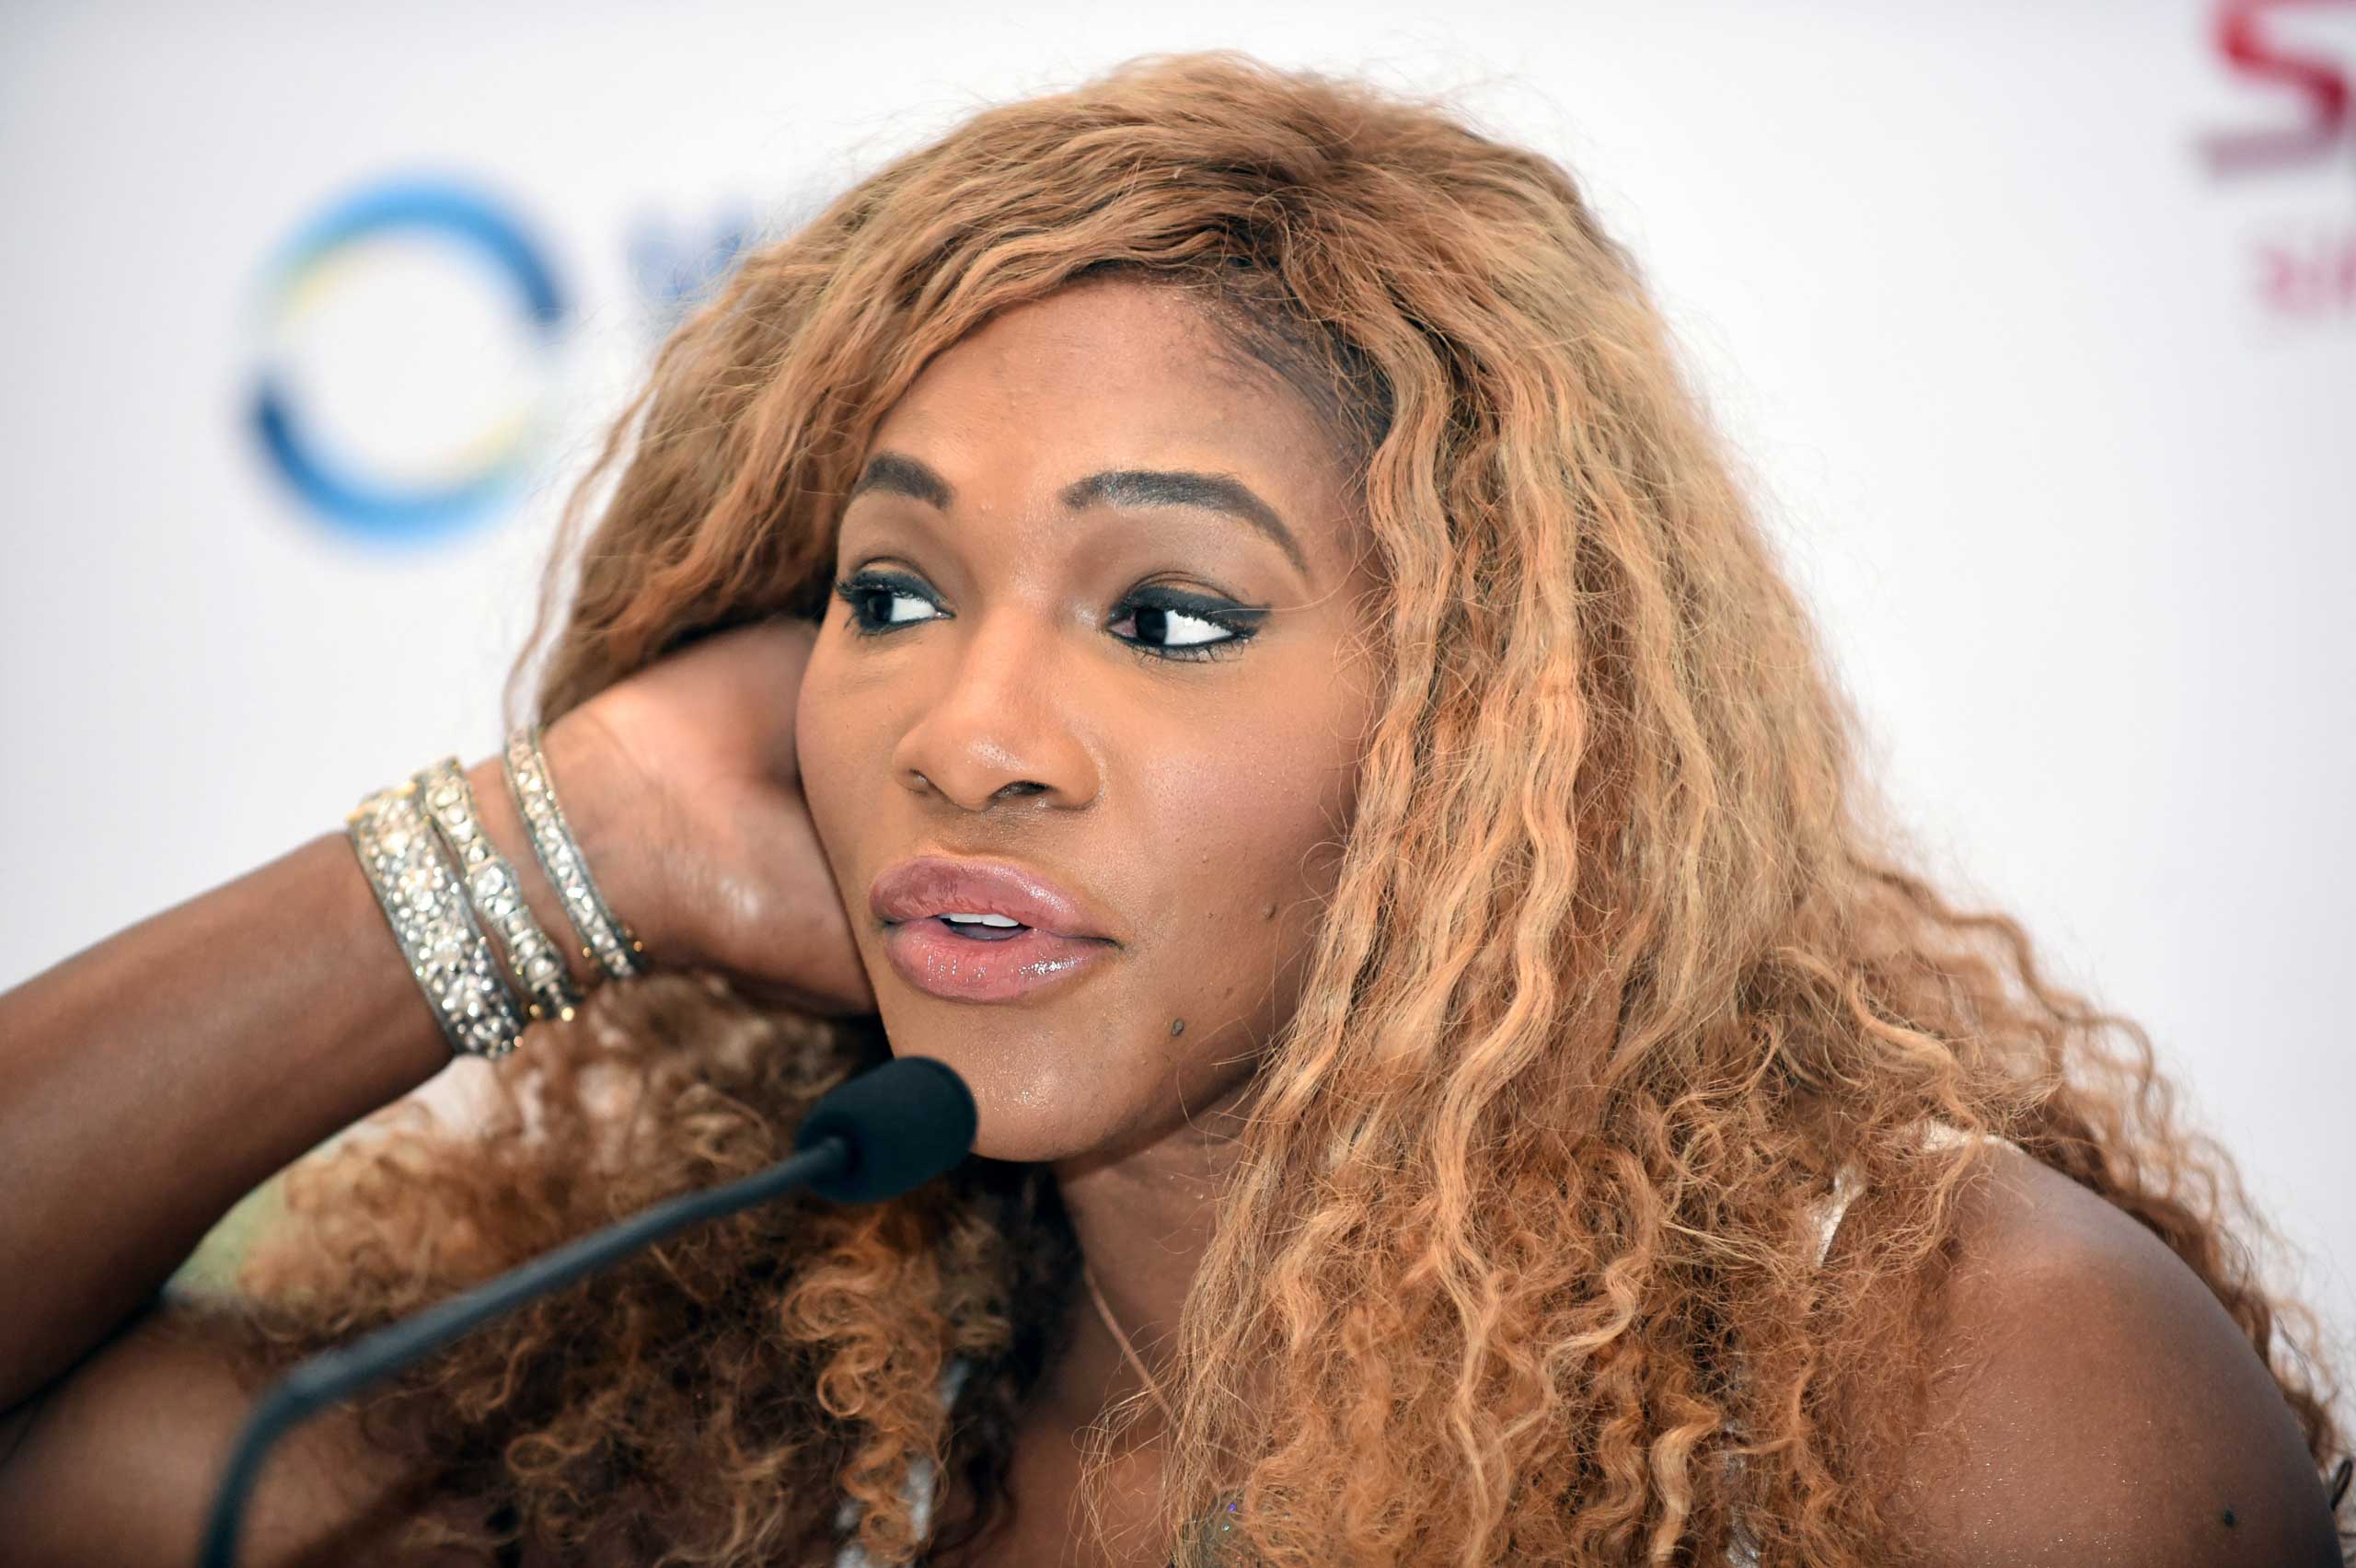 World number one Serena Williams of the US attends a press conference ahead of the Women's Tennis Association (WTA) championships in Singapore on October 19, 2014. World number one Serena Williams lashed out at "sexist" and racist" comments from the head of Russian tennis October 19 after he jokingly called her and her sister Venus the "Williams brothers". AFP PHOTO / ROSLAN RAHMAN        (Photo credit should read ROSLAN RAHMAN/AFP/Getty Images) (ROSLAN RAHMAN&mdash;AFP/Getty Images)